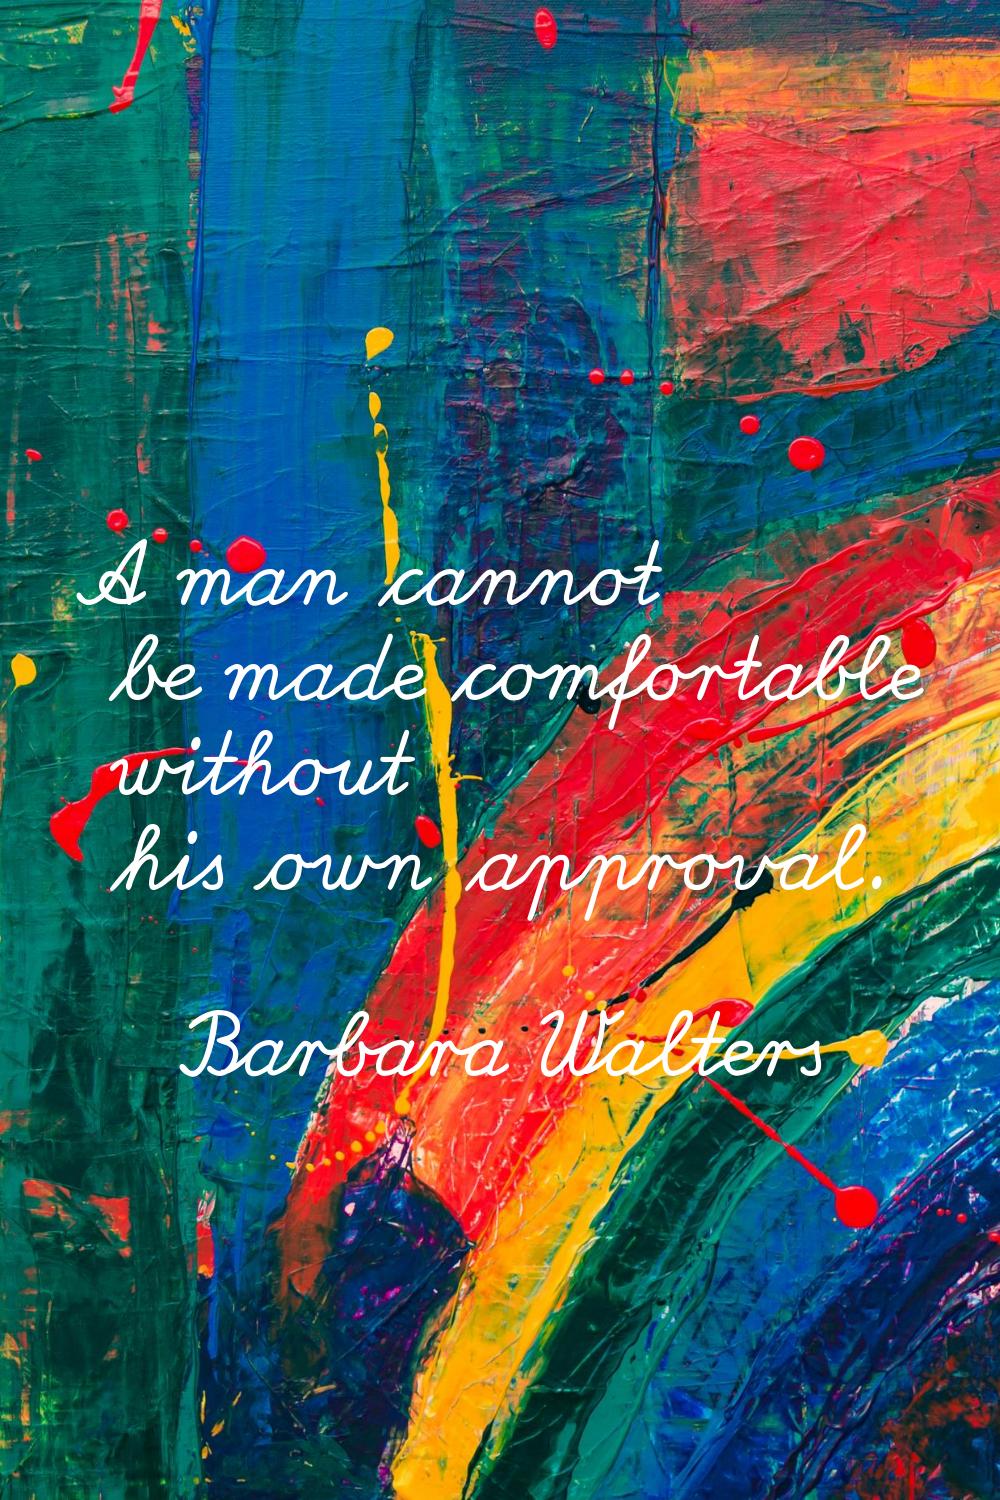 A man cannot be made comfortable without his own approval.